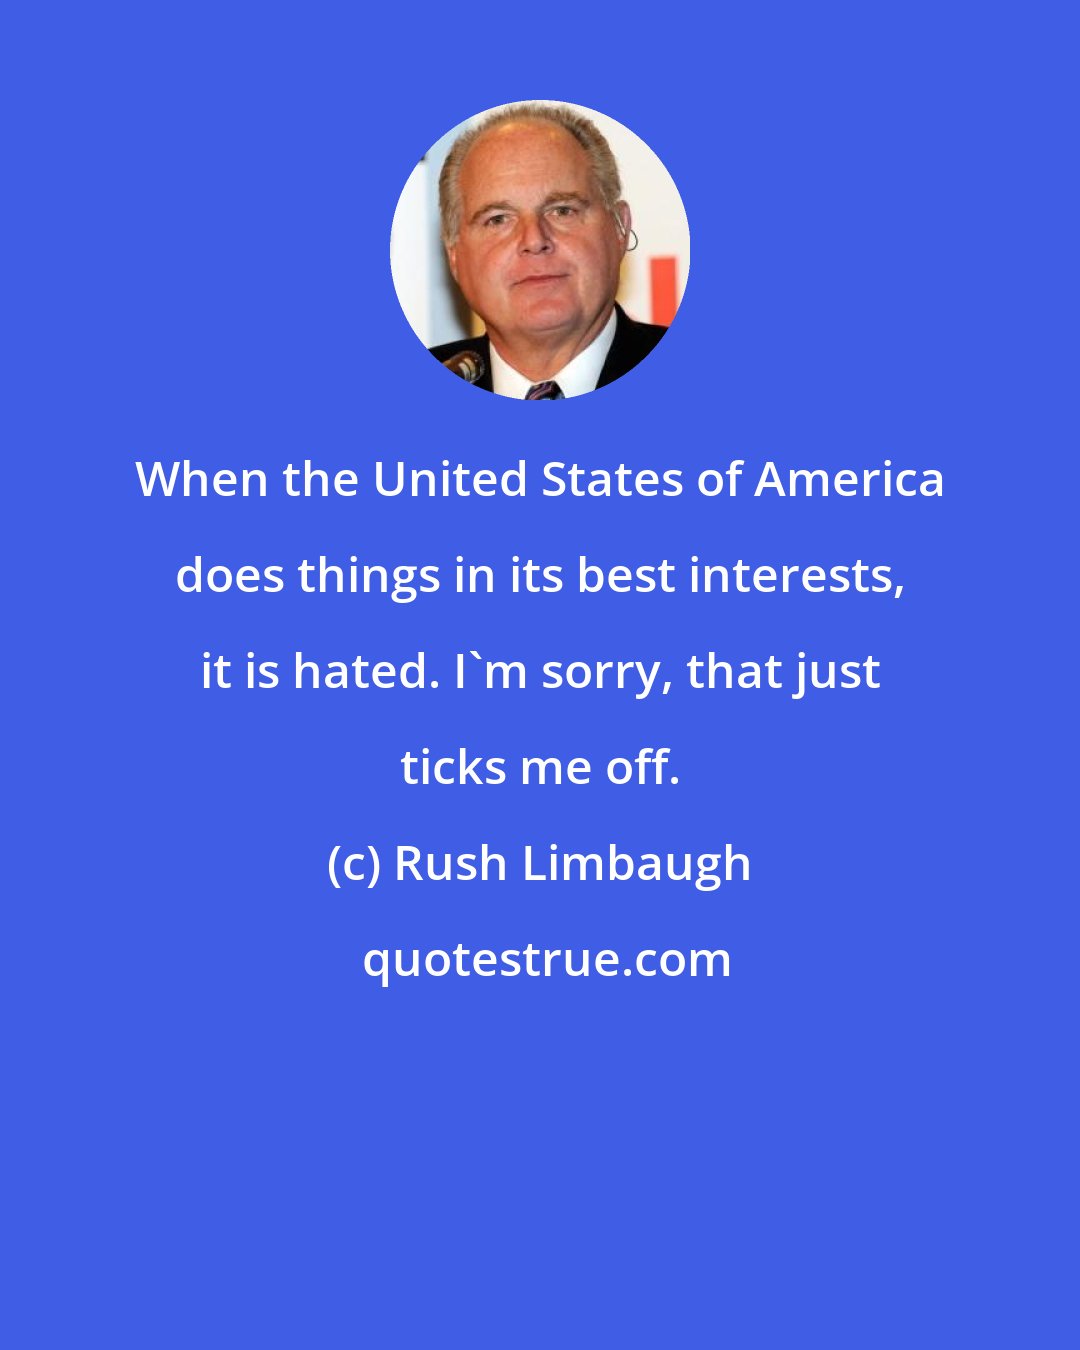 Rush Limbaugh: When the United States of America does things in its best interests, it is hated. I'm sorry, that just ticks me off.